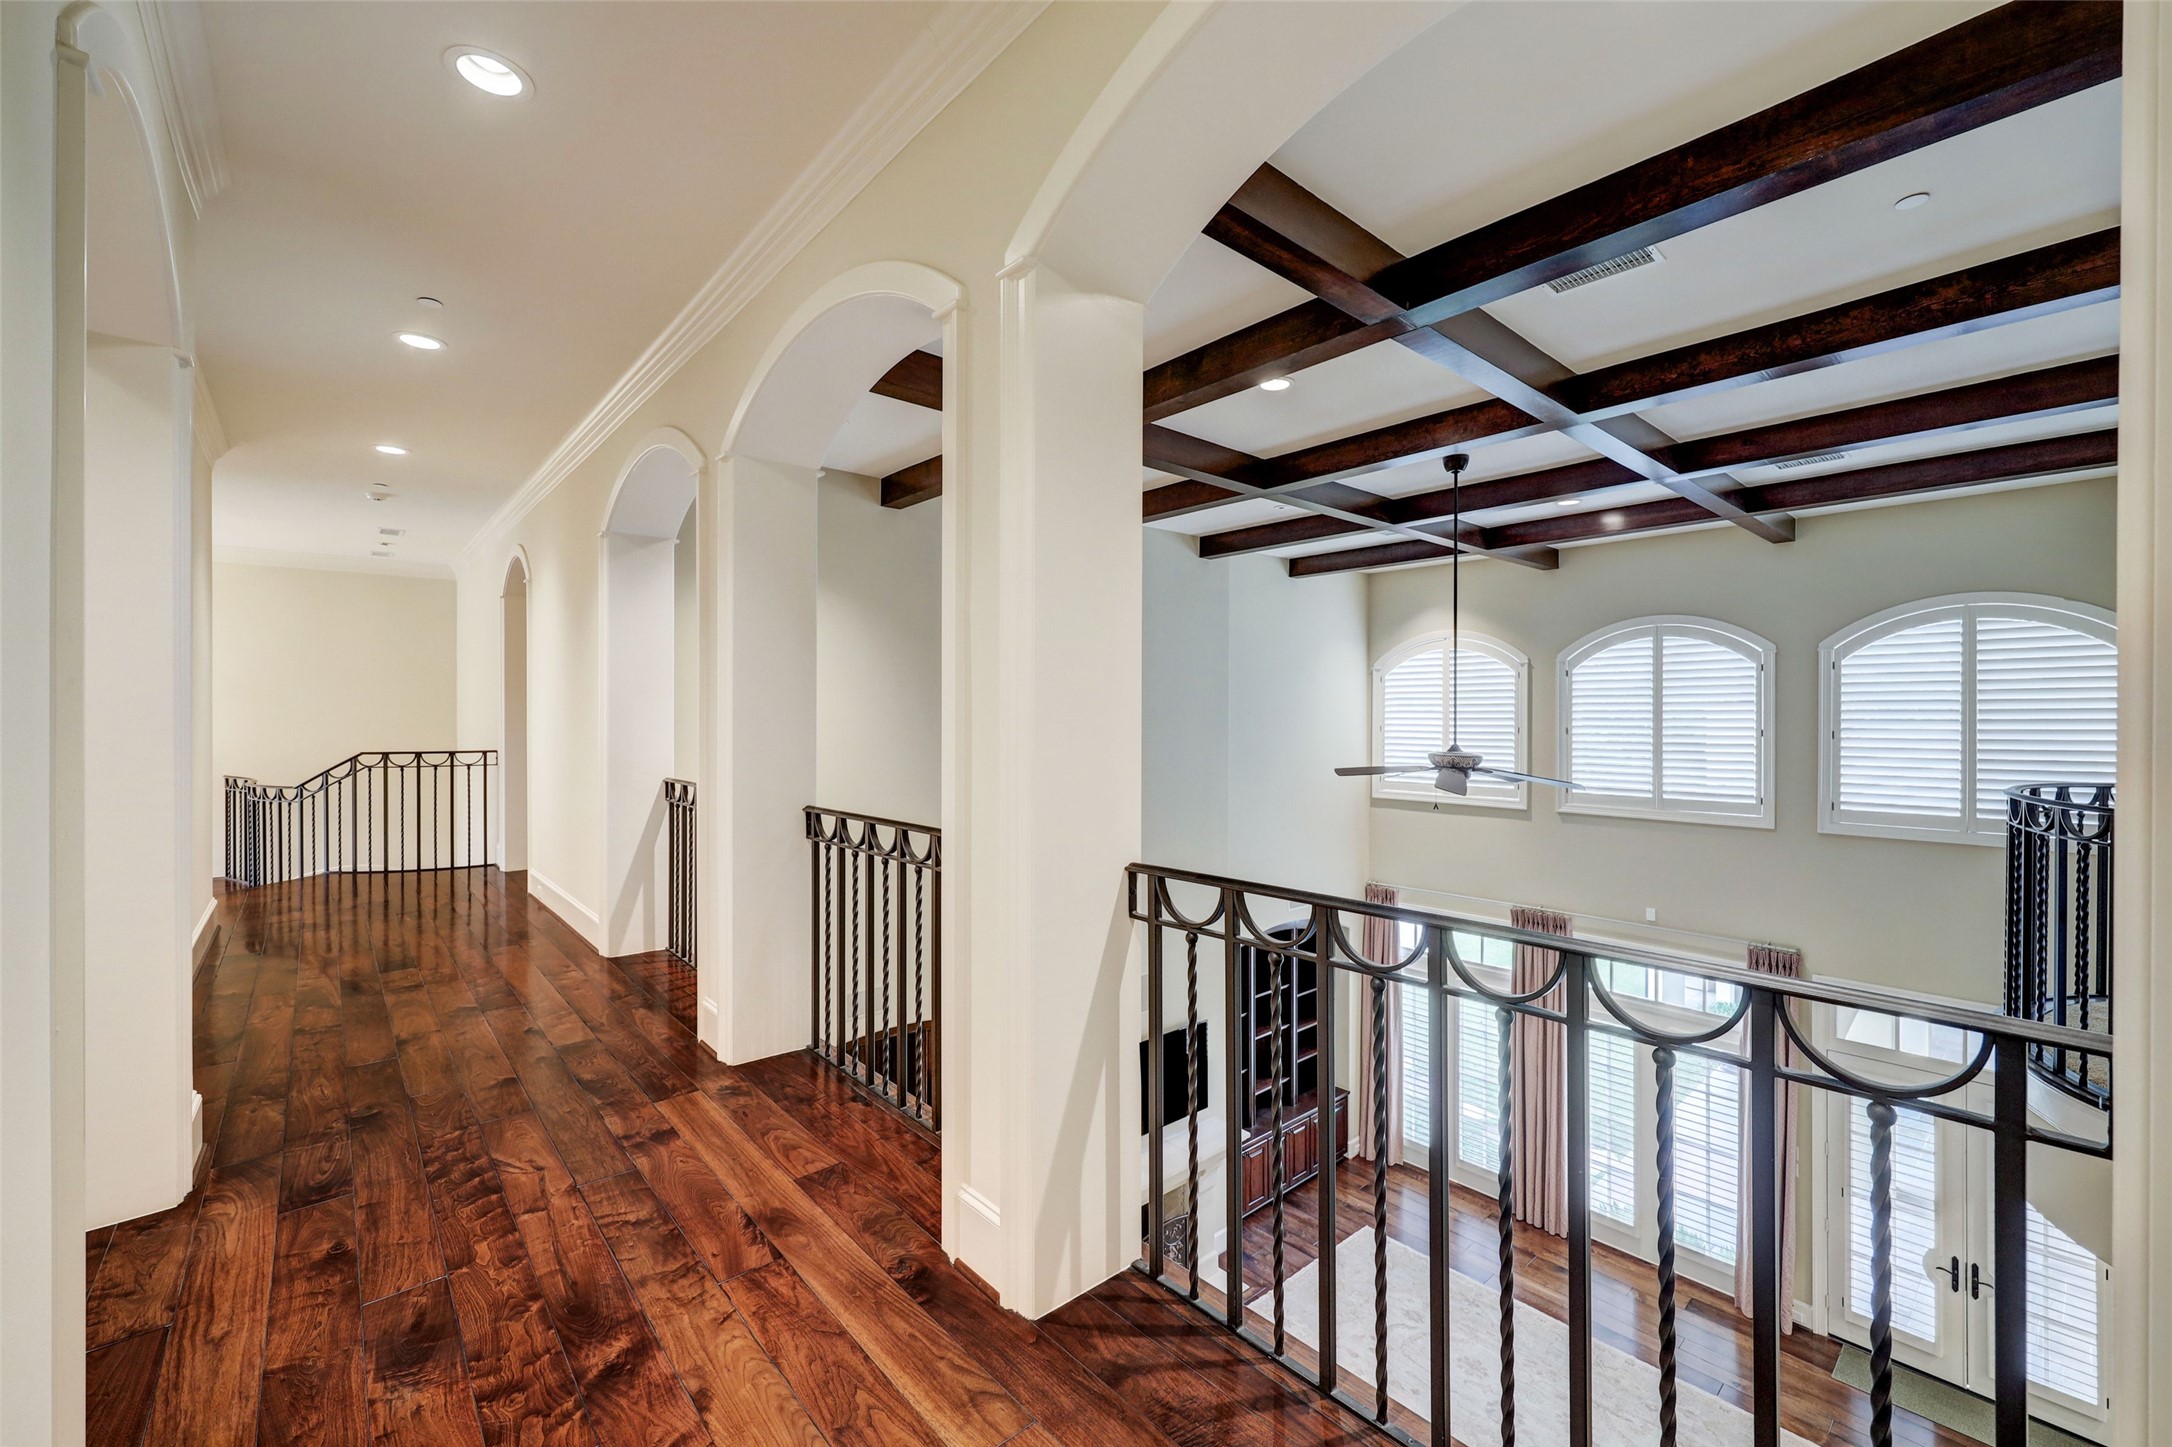 The upper Gallery features hardwood floors and a fantastic view of the Great Room below.